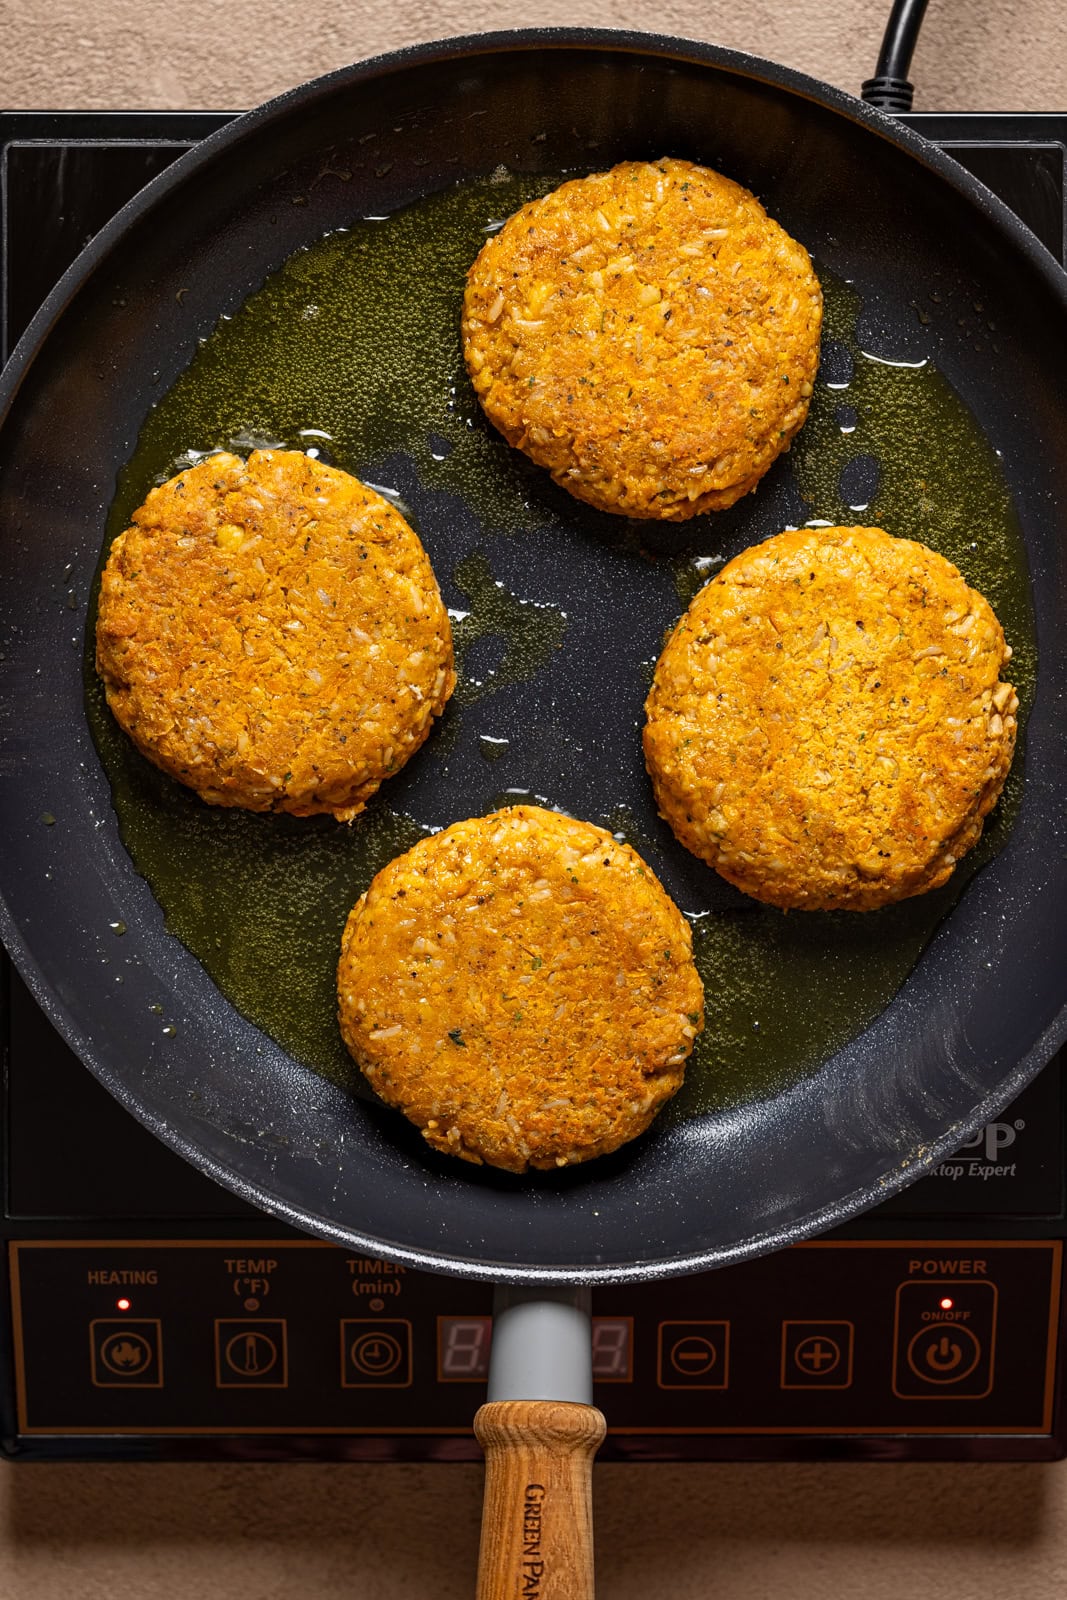 Veggie burger patties being seared in a skillet over the stovetop.